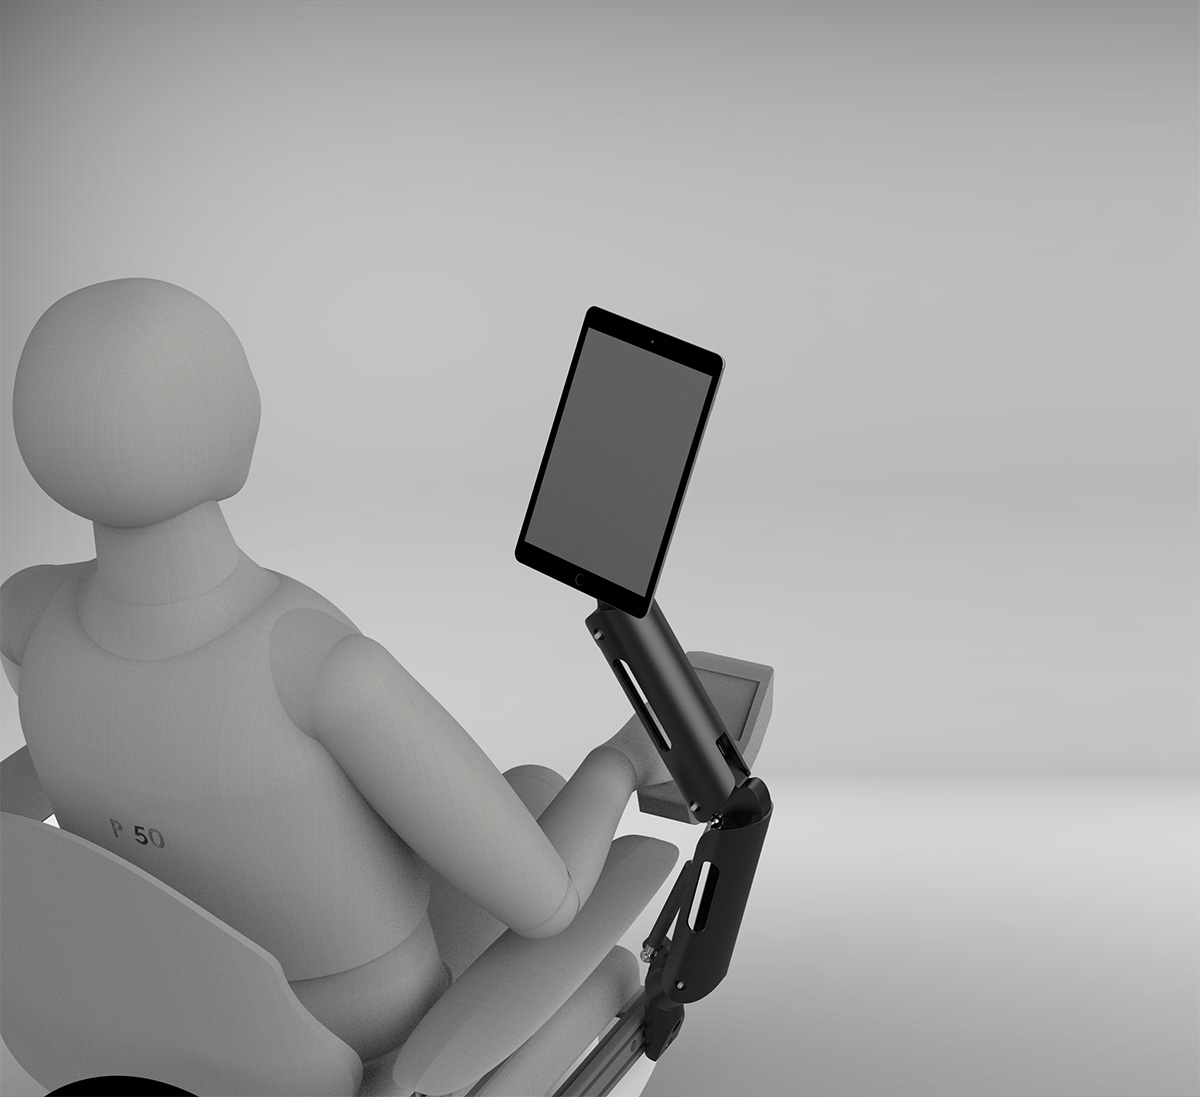 CAD rendering of human figure in a wheelchair with adjustable support arm attached